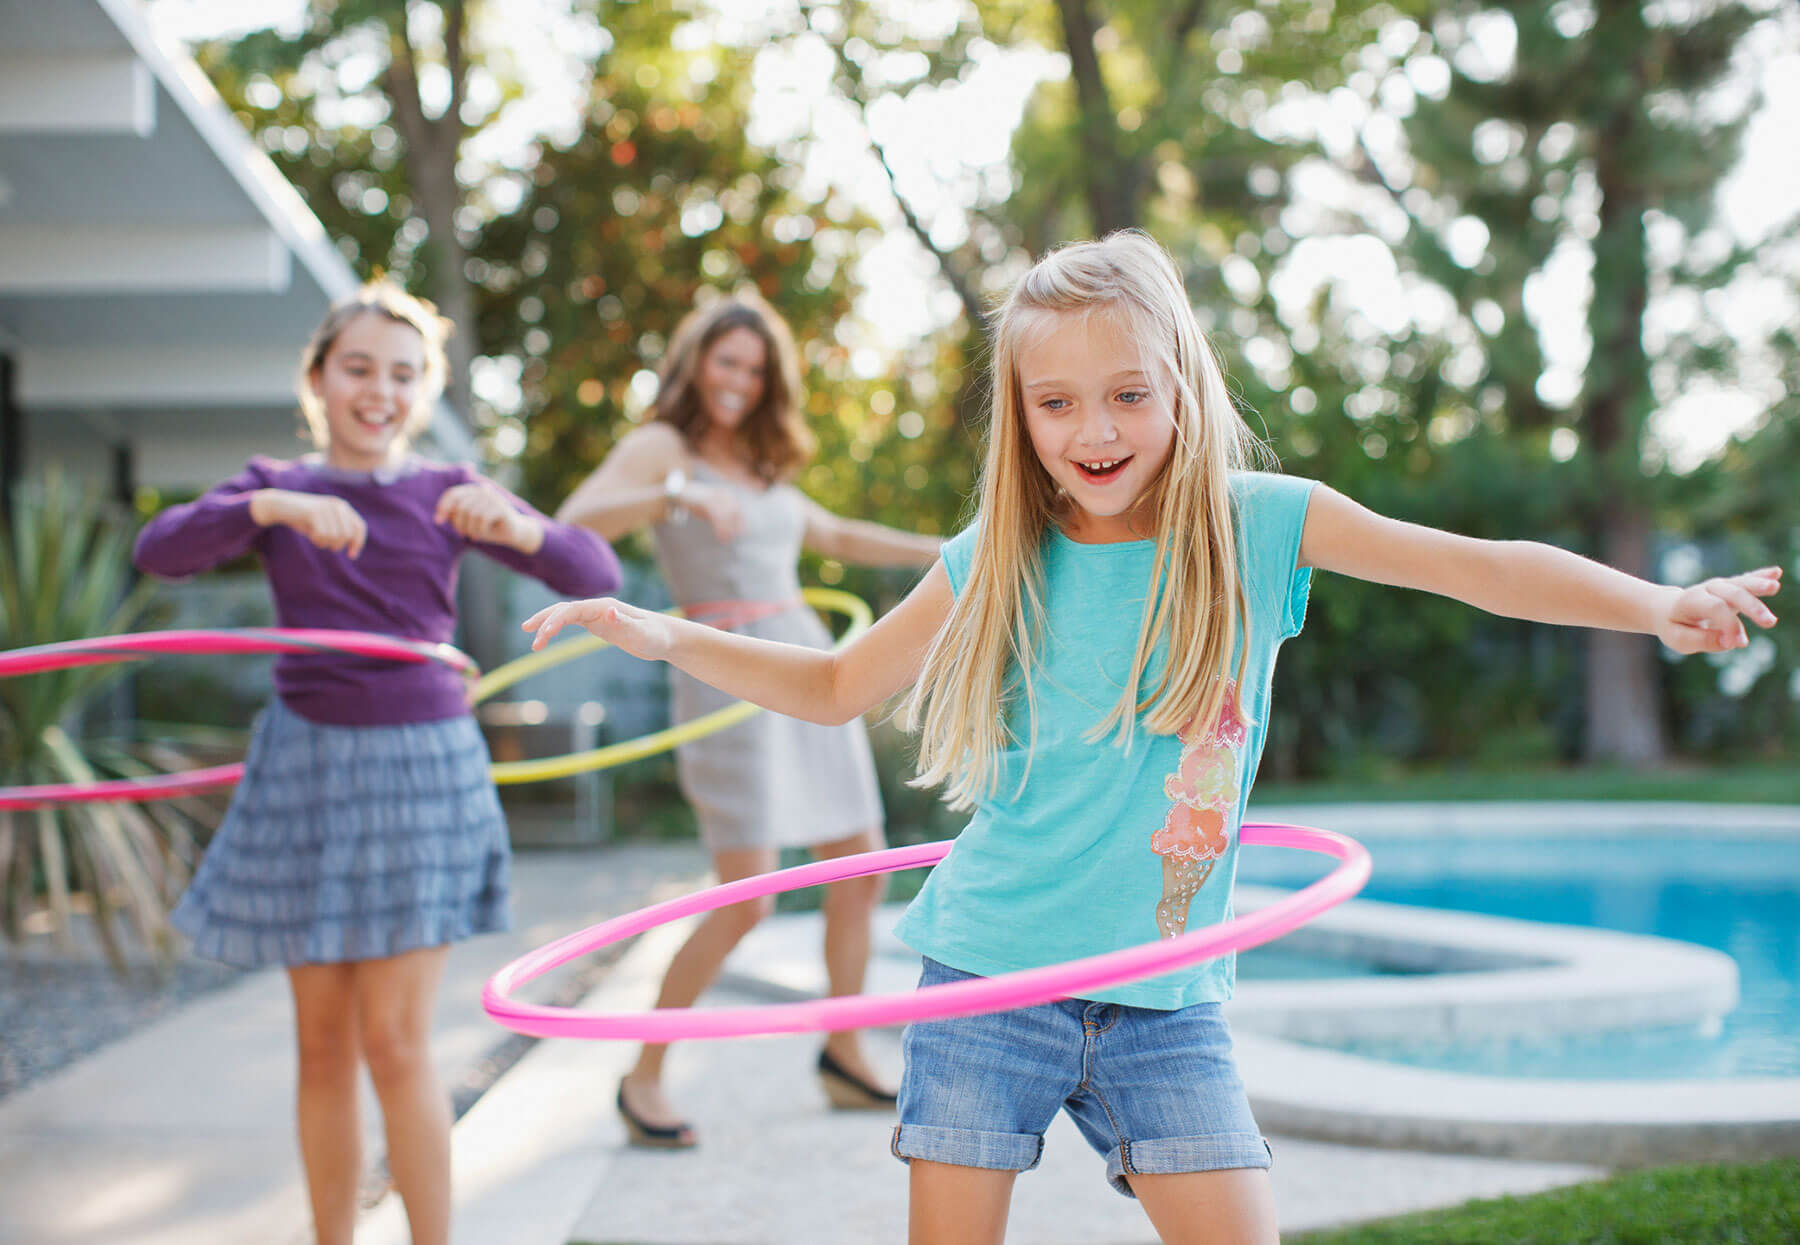 Young girl hula-hooping with a couple friends in a back yard by a pool